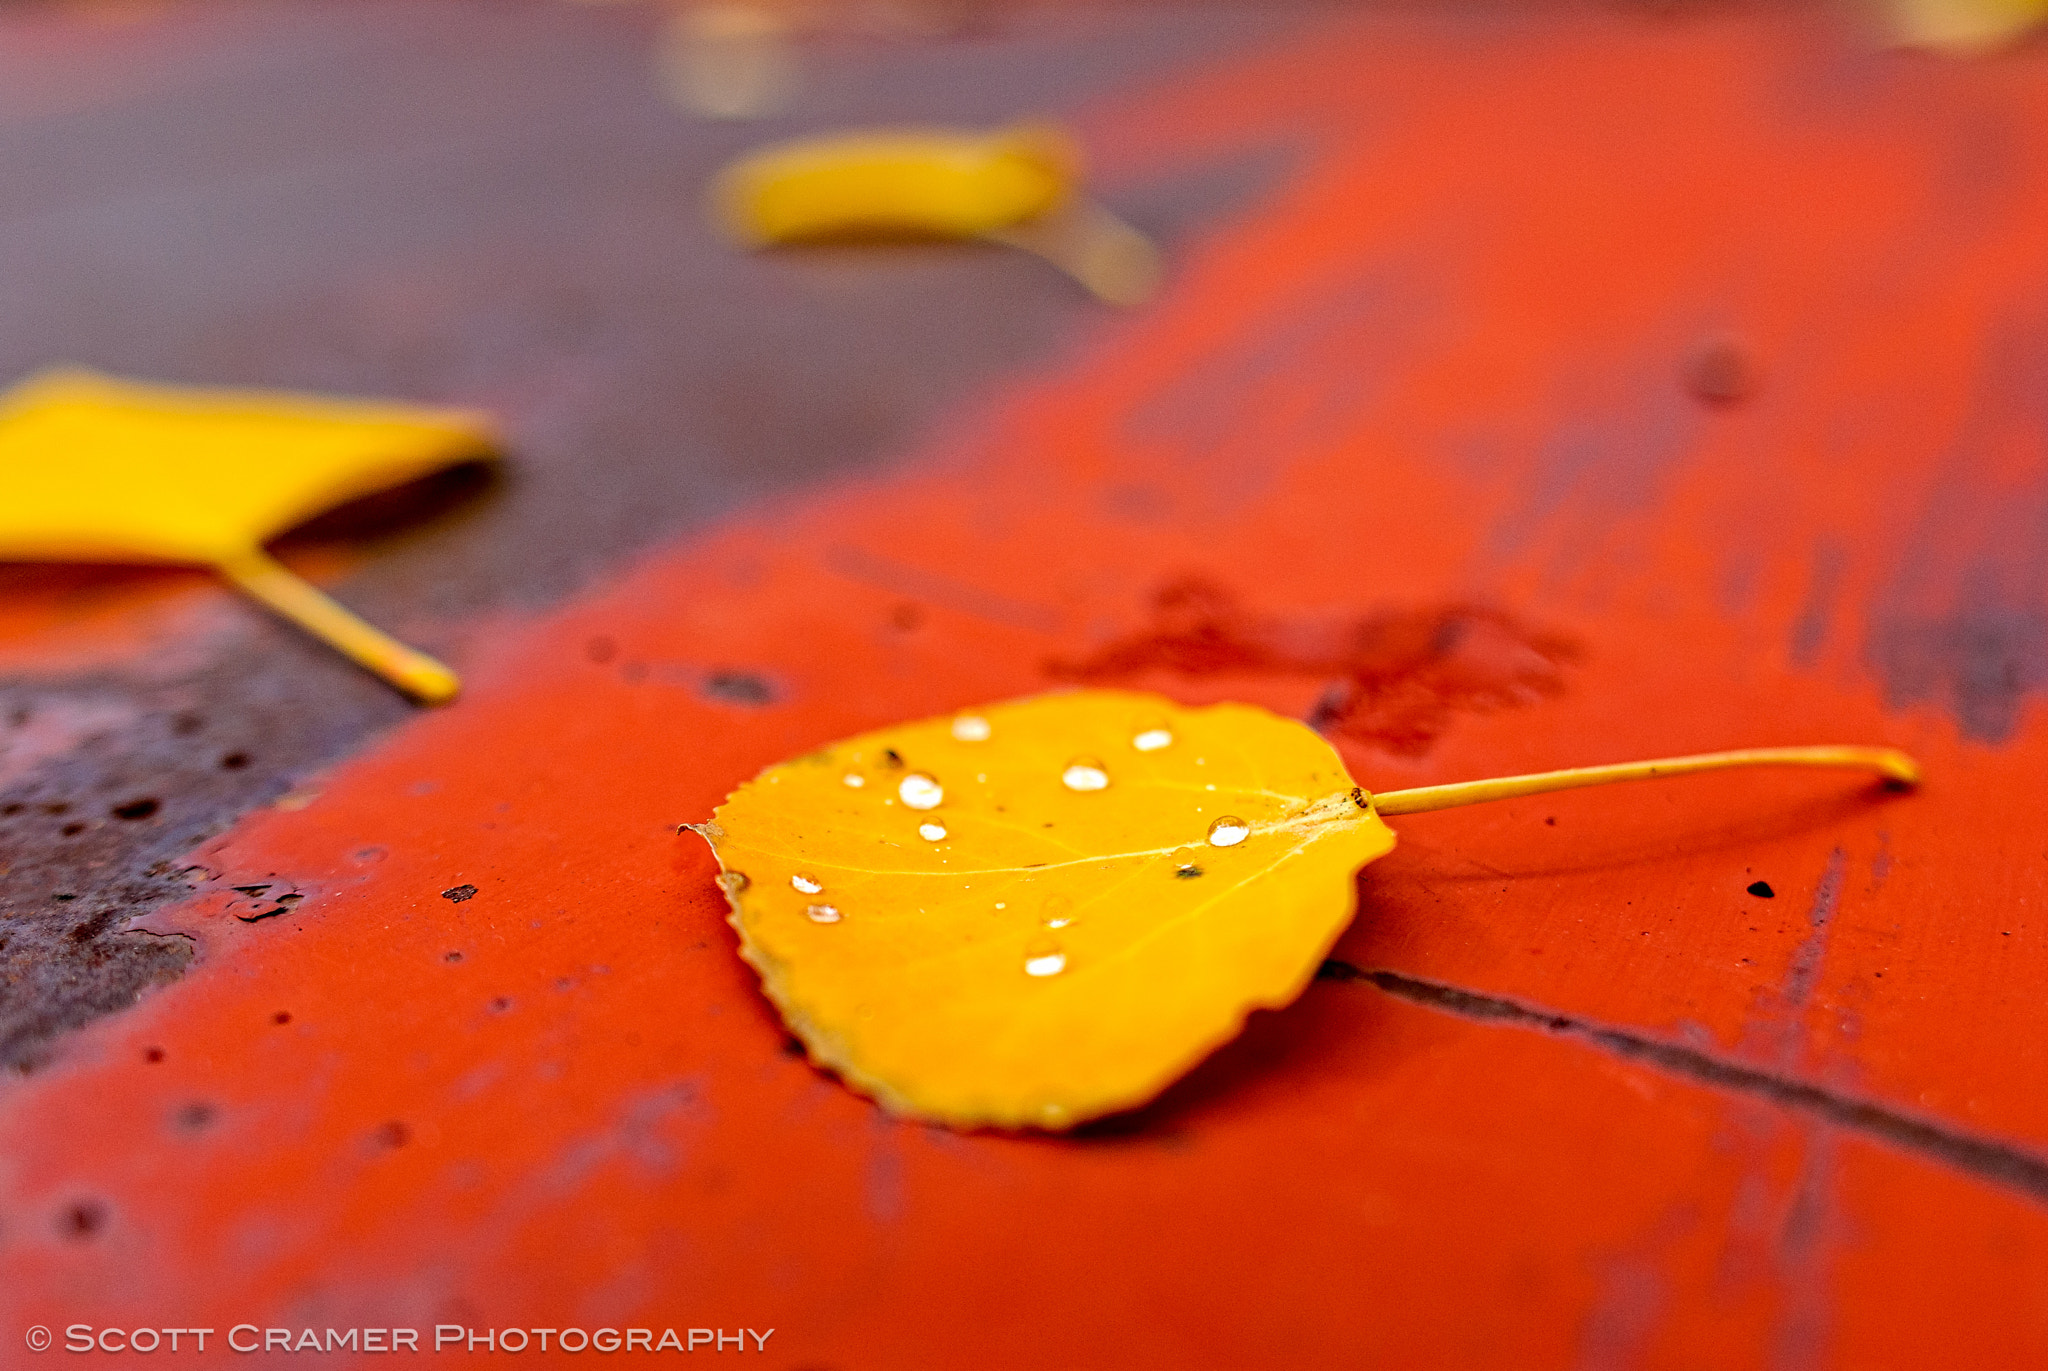 Nikon D200 + Sigma 24mm F1.8 EX DG Aspherical Macro sample photo. Aspen leaves on old red truck in autumn photography